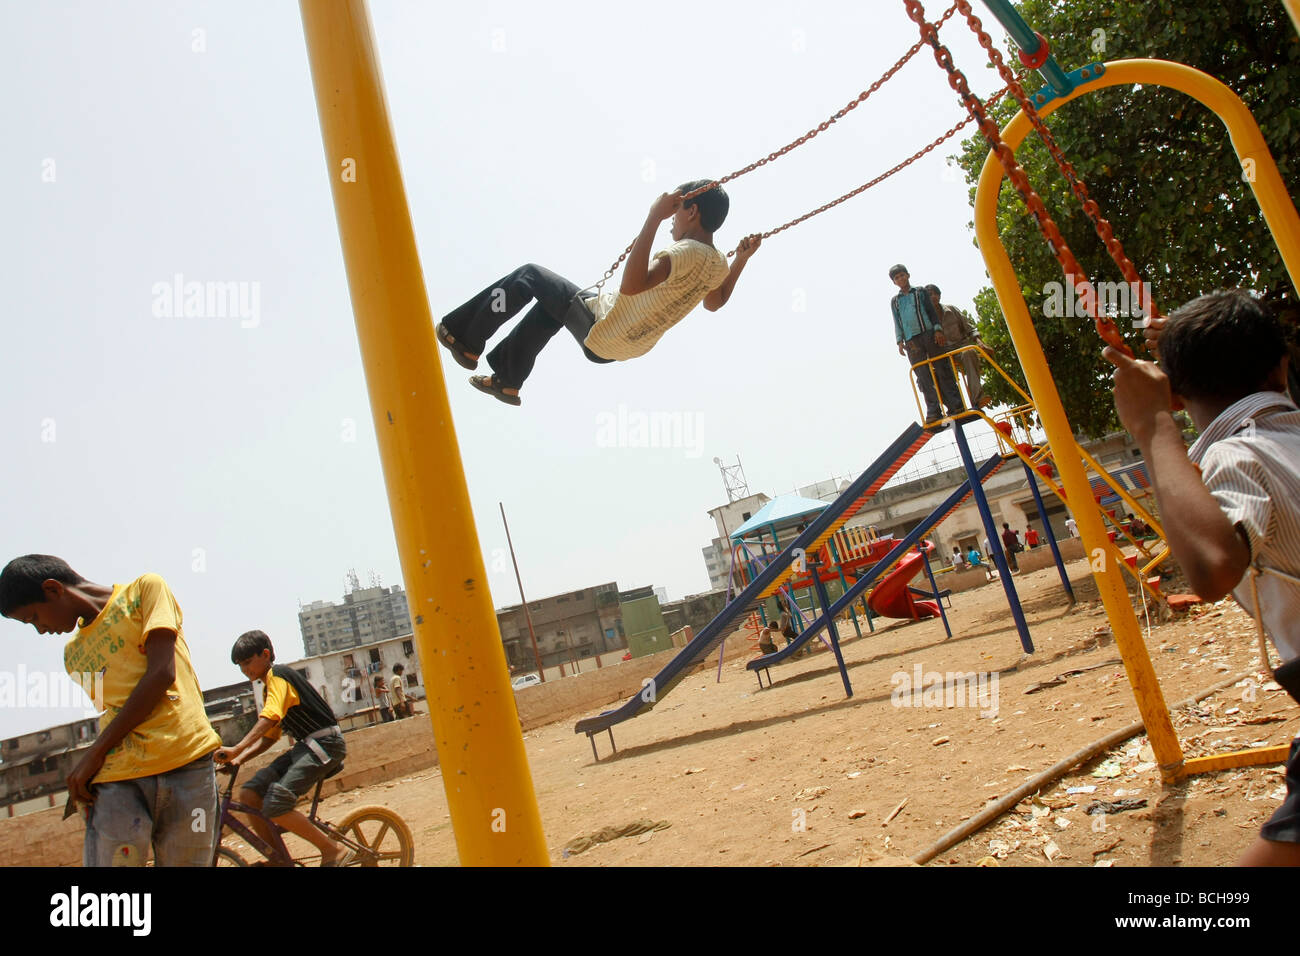 Children play on a set of newly built swings in Dharavi, the largest slum area in Mumbai (Bombay) in India Stock Photo